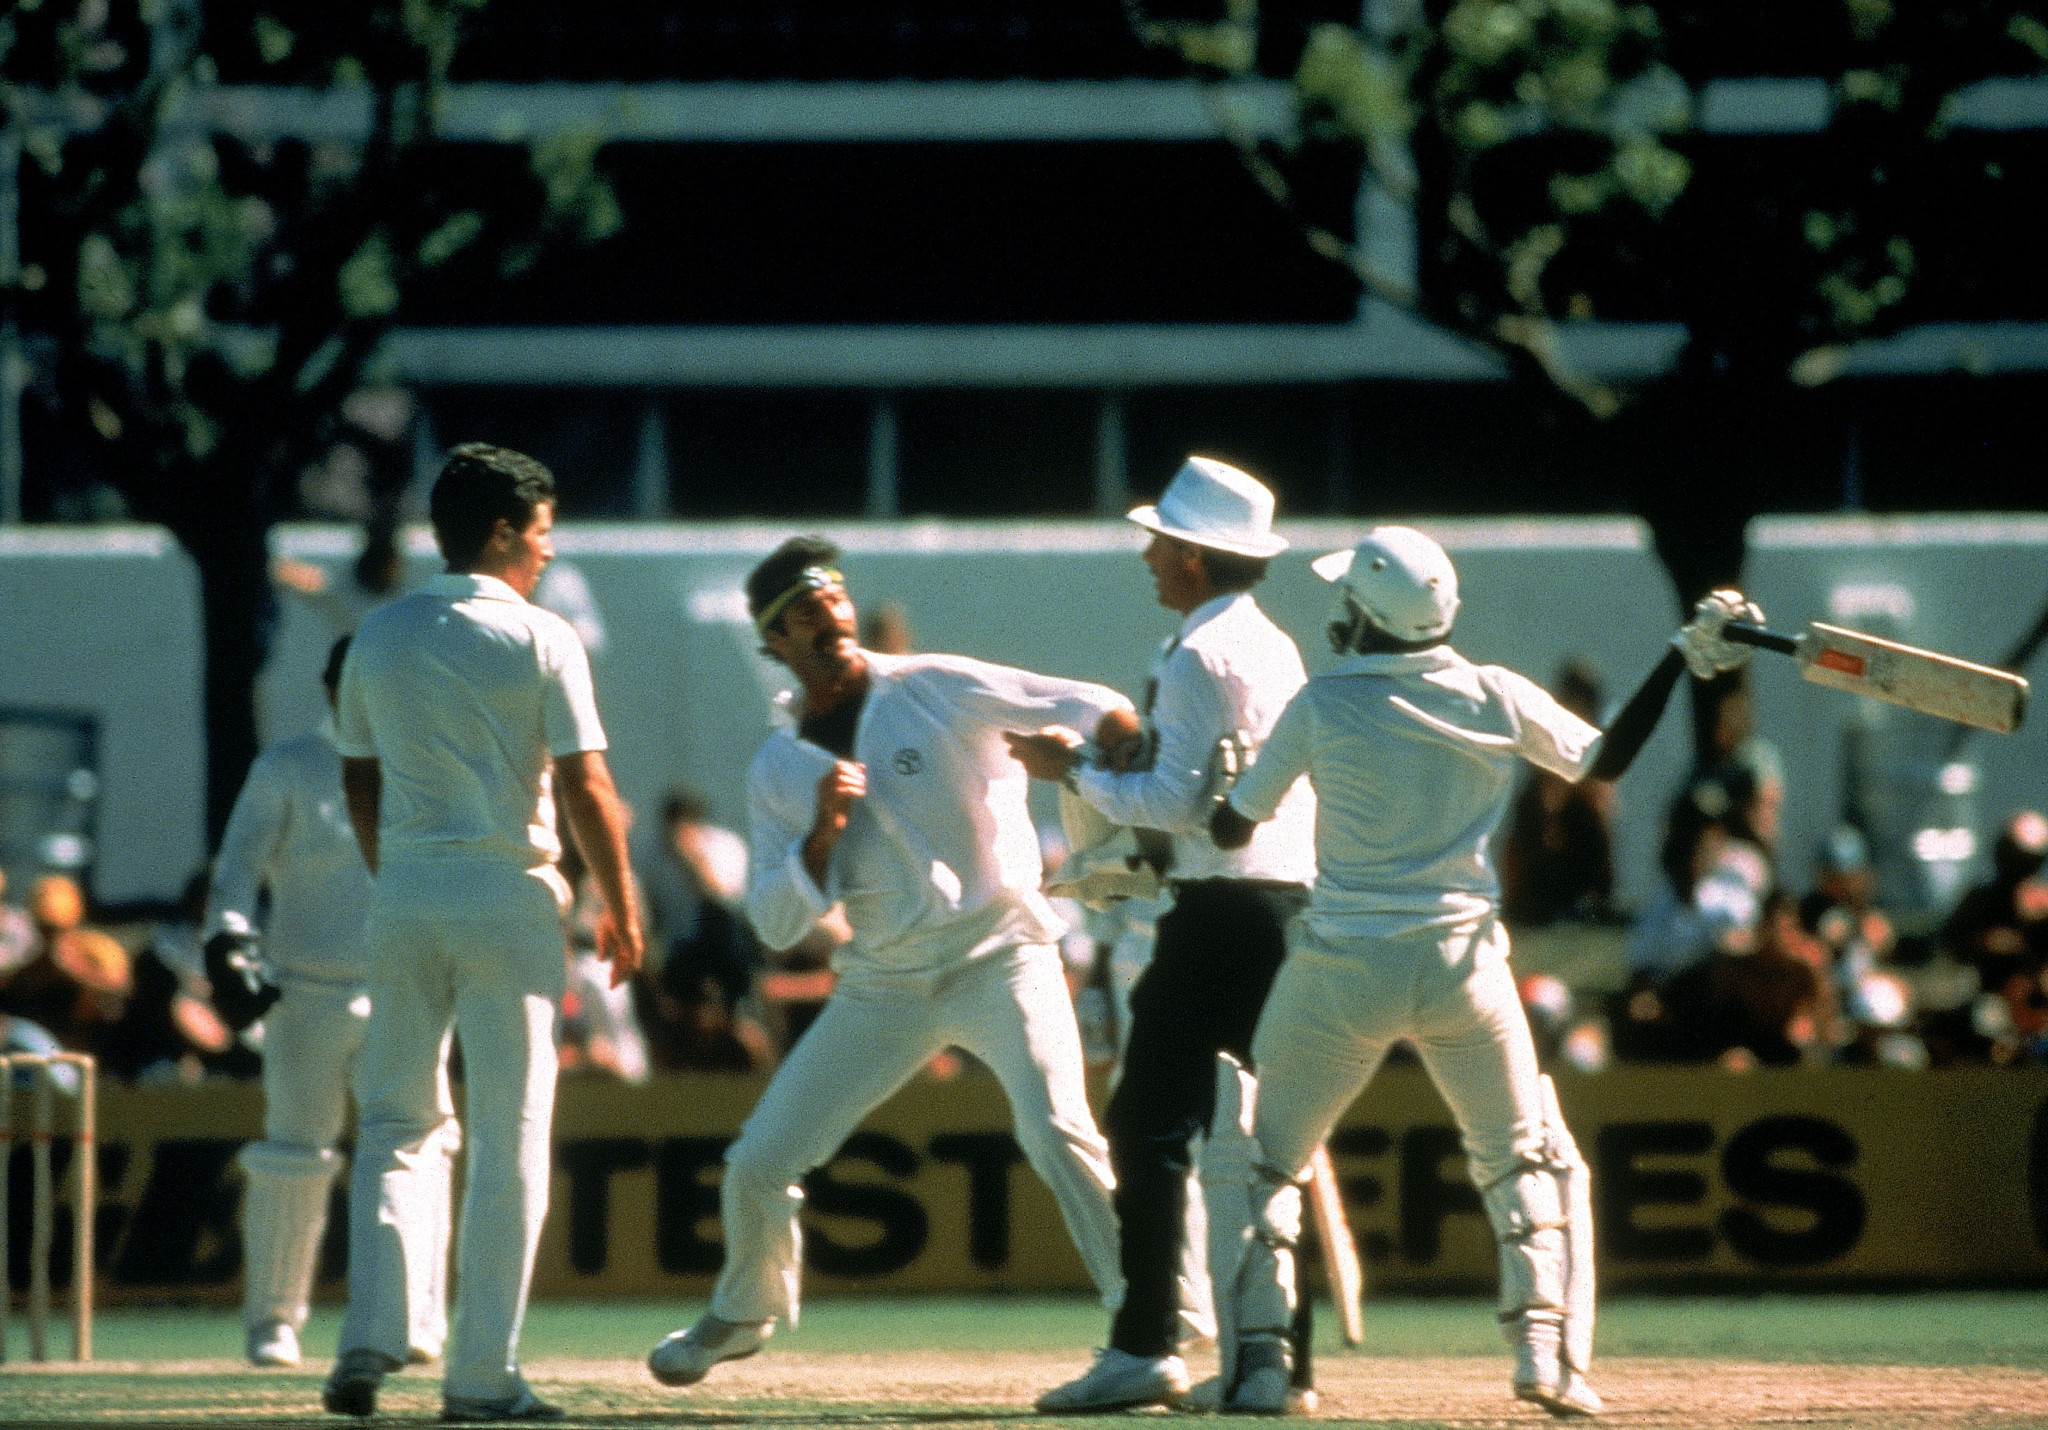 Dennis Lillee, left, and Javed Miandad nearly come to blows in a test Match in 1981 ©Getty Images